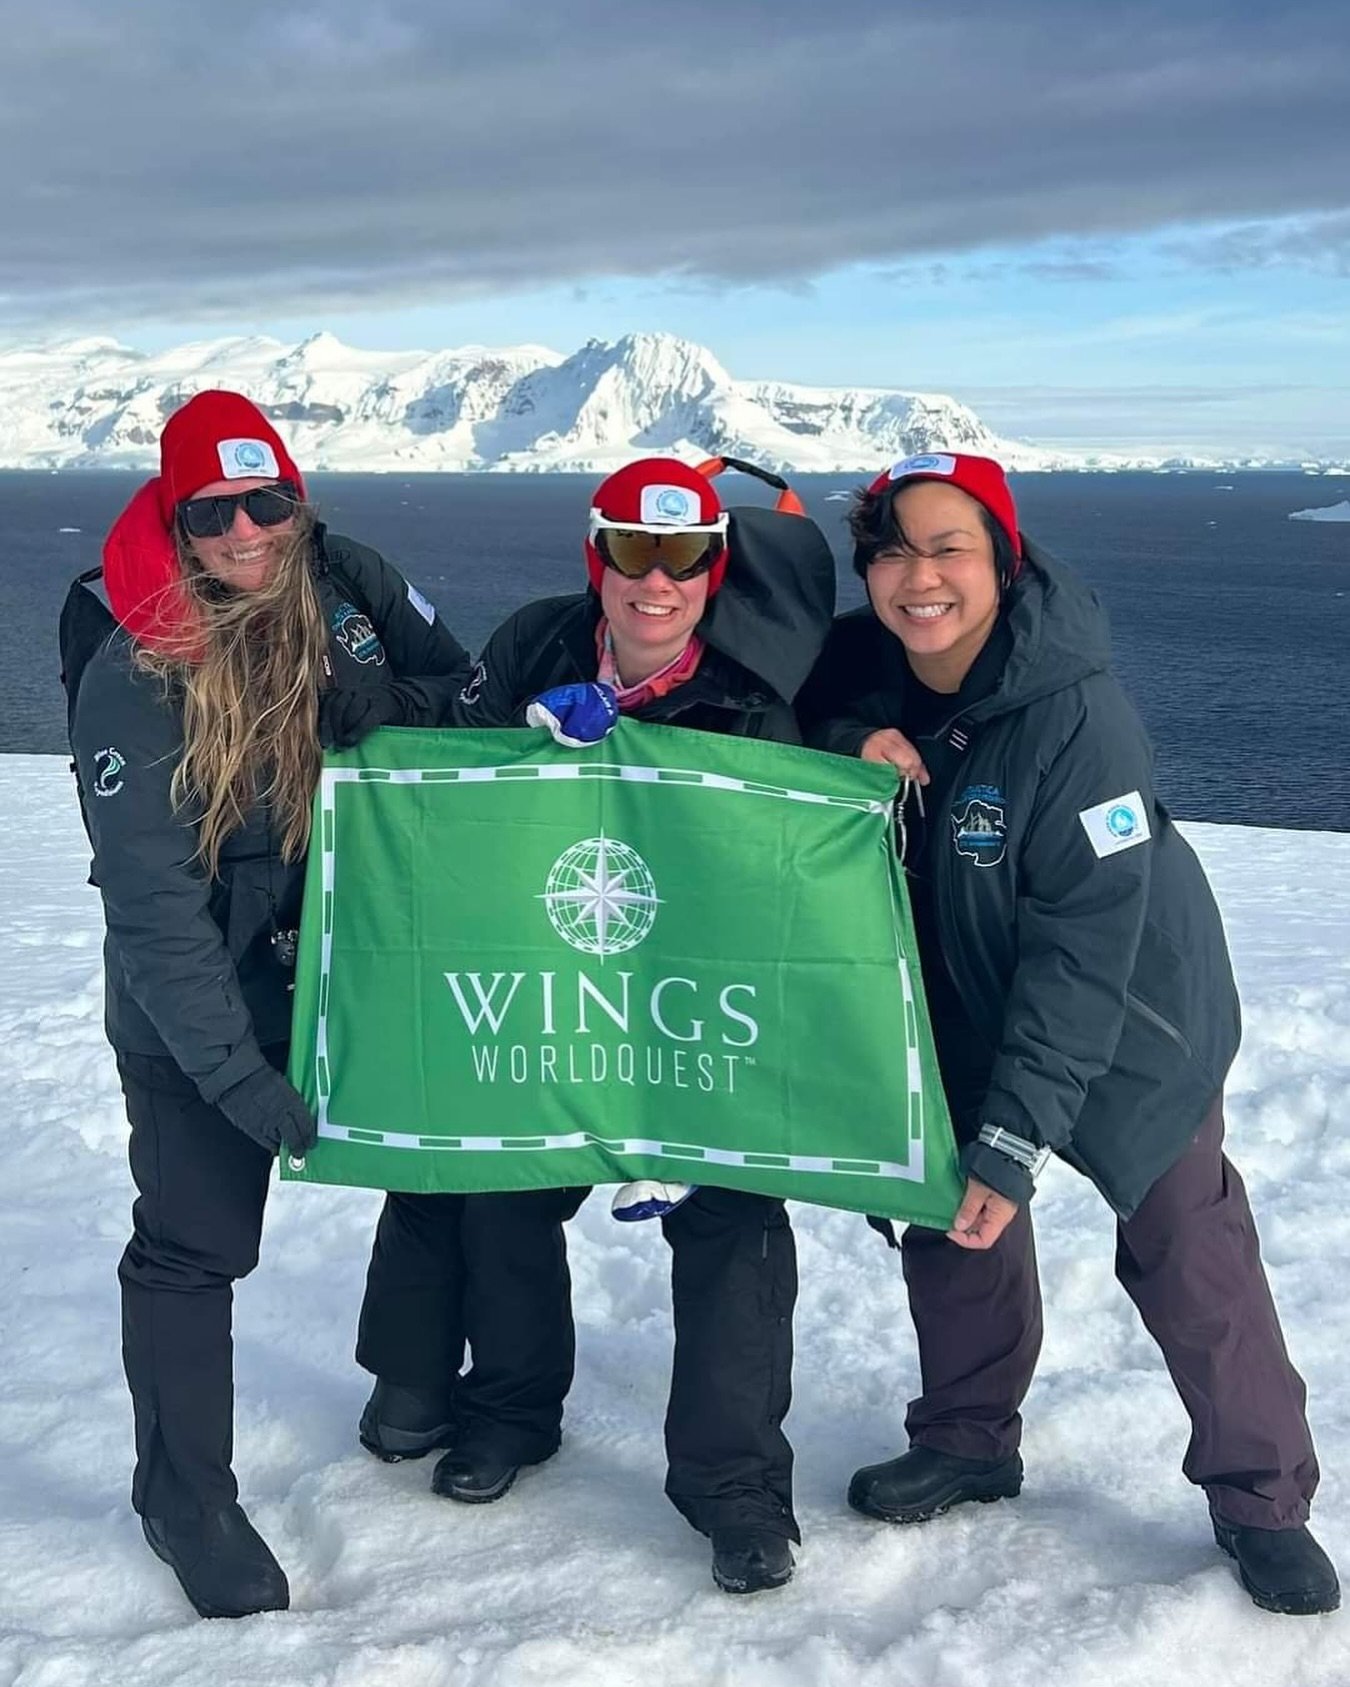 Tiffany Duong, Aya Walraven, &amp; Dr. Louise Edwards have joined forces to launch Three Otters Media. With the WINGS Flag in hand, they are embarking on a groundbreaking expedition to Antarctica! 💙💚

Their mission? To create a science-based virtua